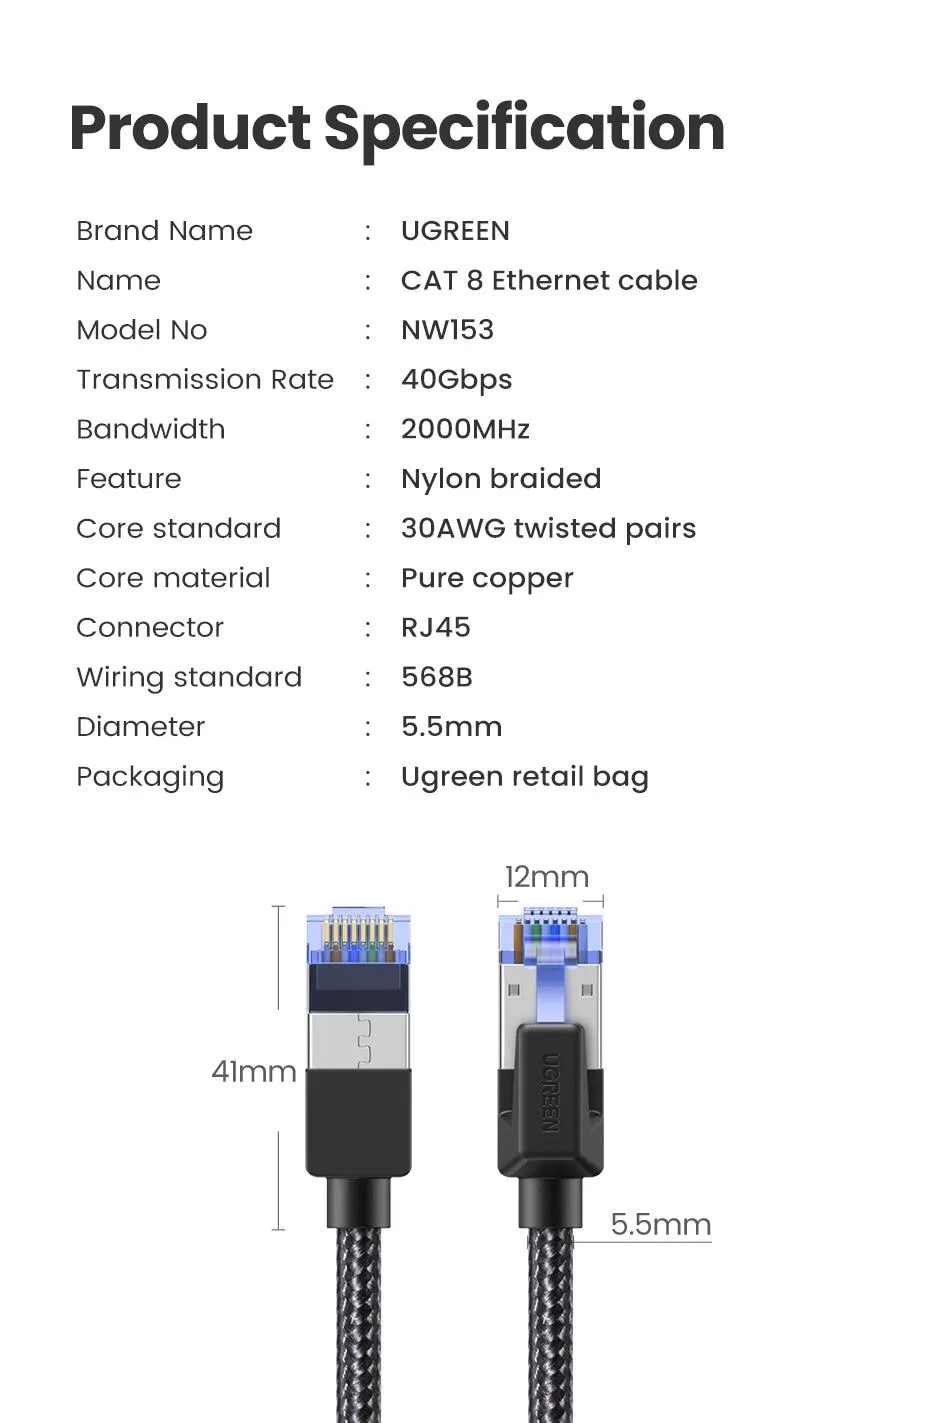 UGREEN Cat 8 Ethernet Cable  40Gbps 2000Mhz Internet Cable 